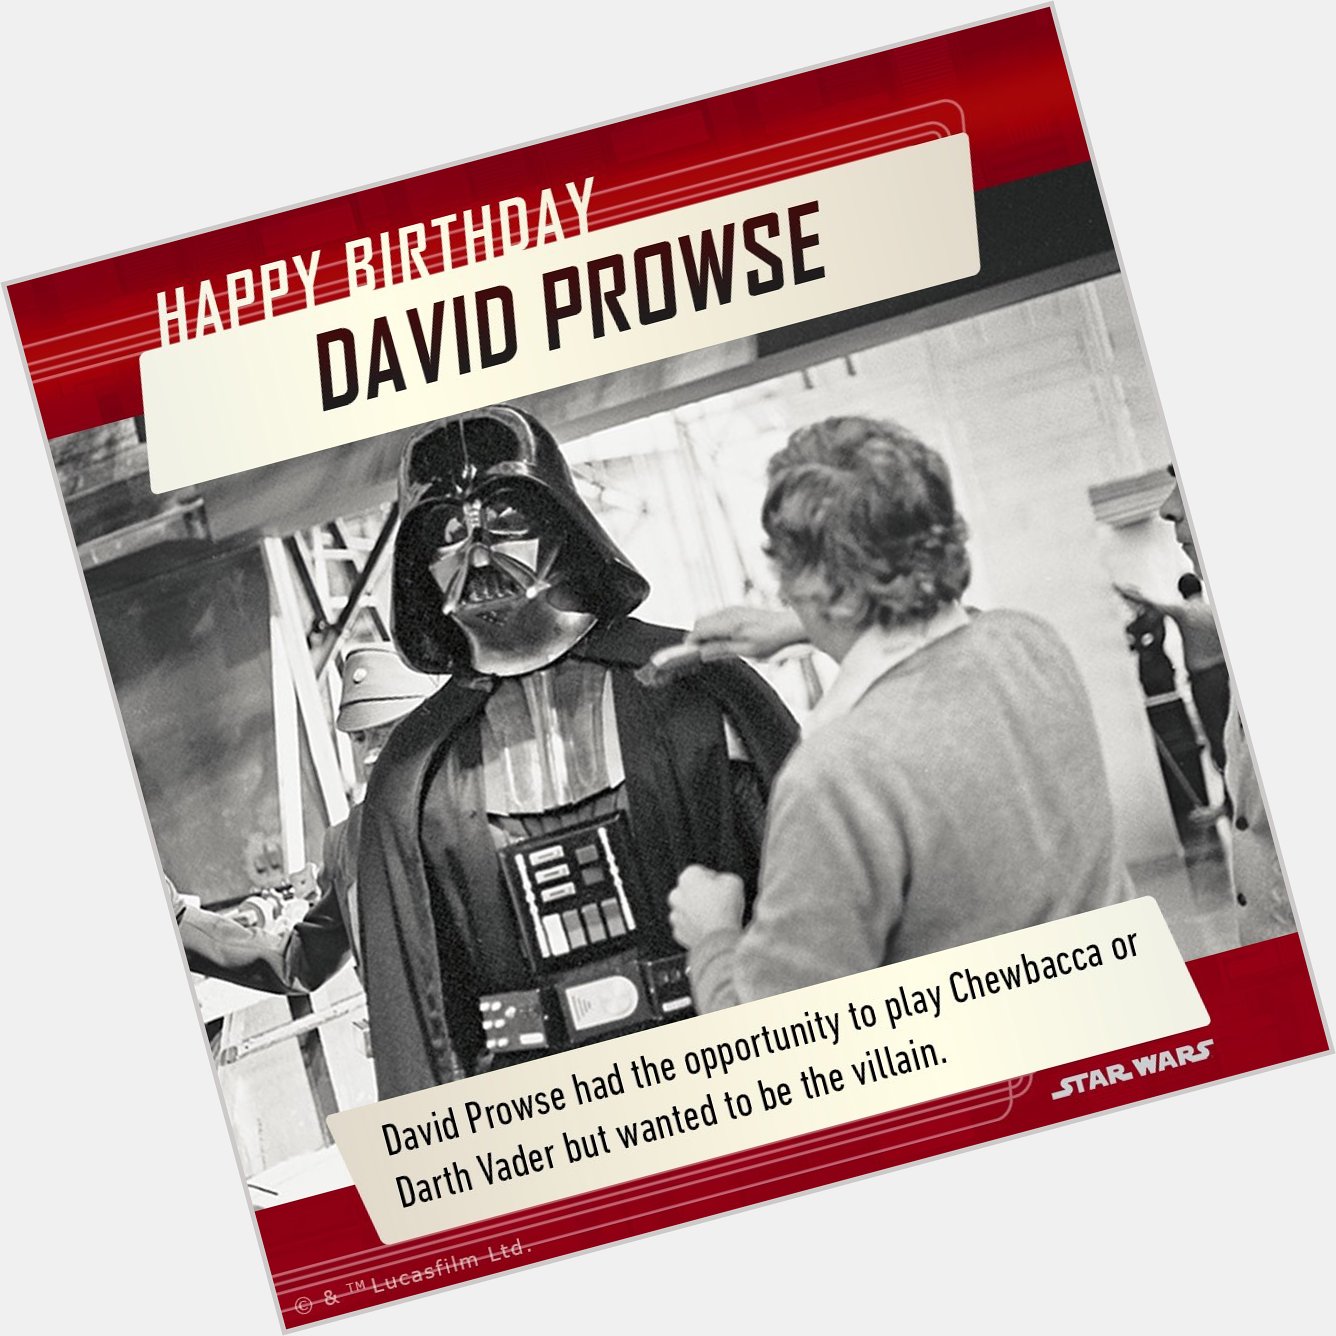 A very Happy Birthday to the man behind the suit - David Prowse!  